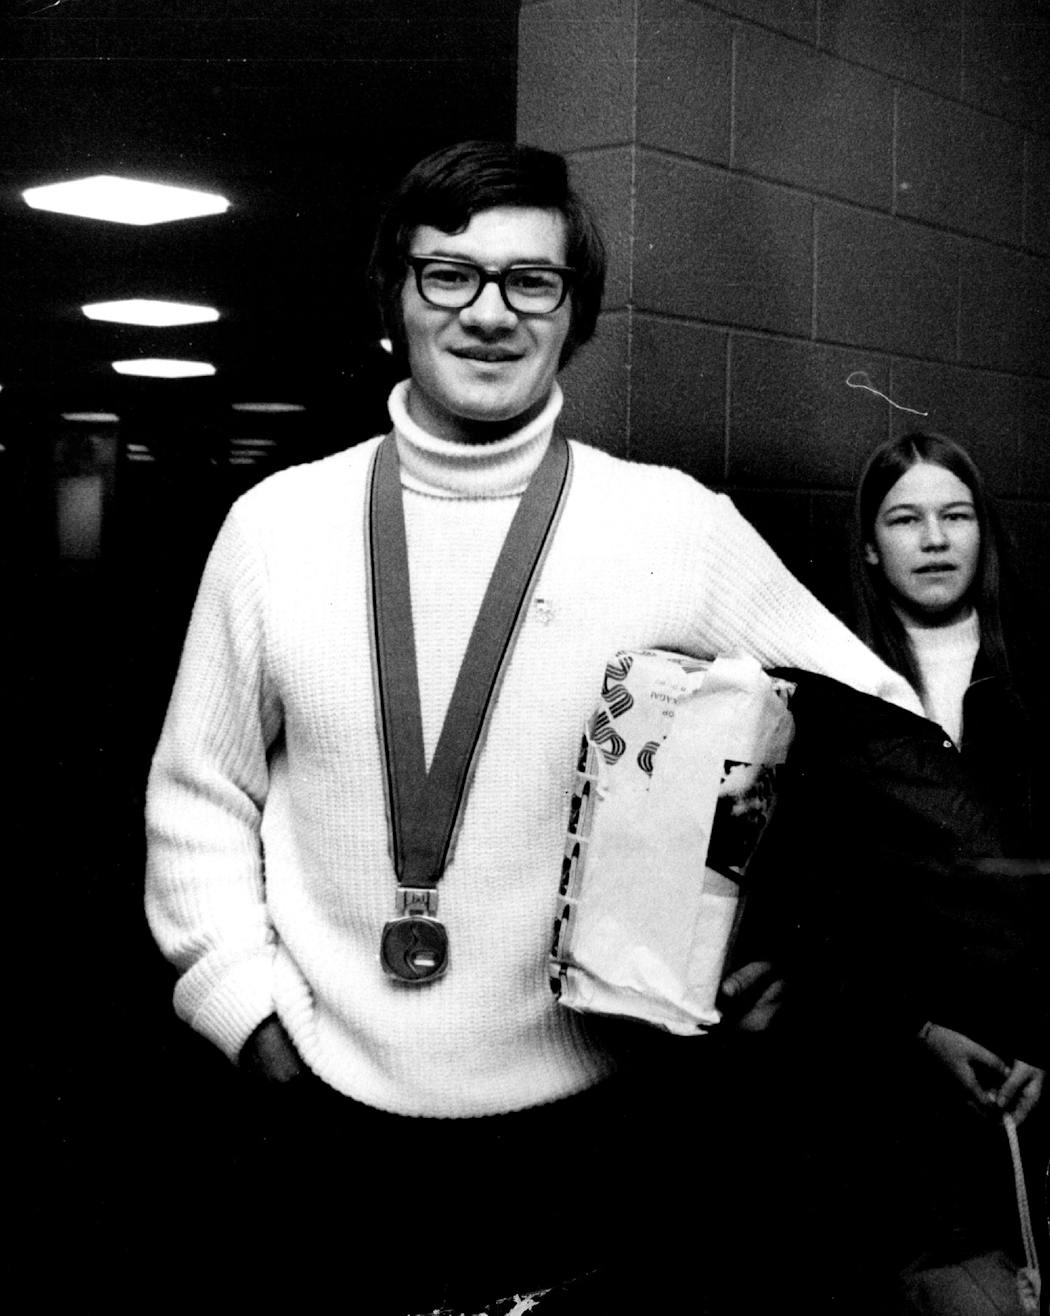 February, 1972: Henry Boucha with his Olympic silver medal.